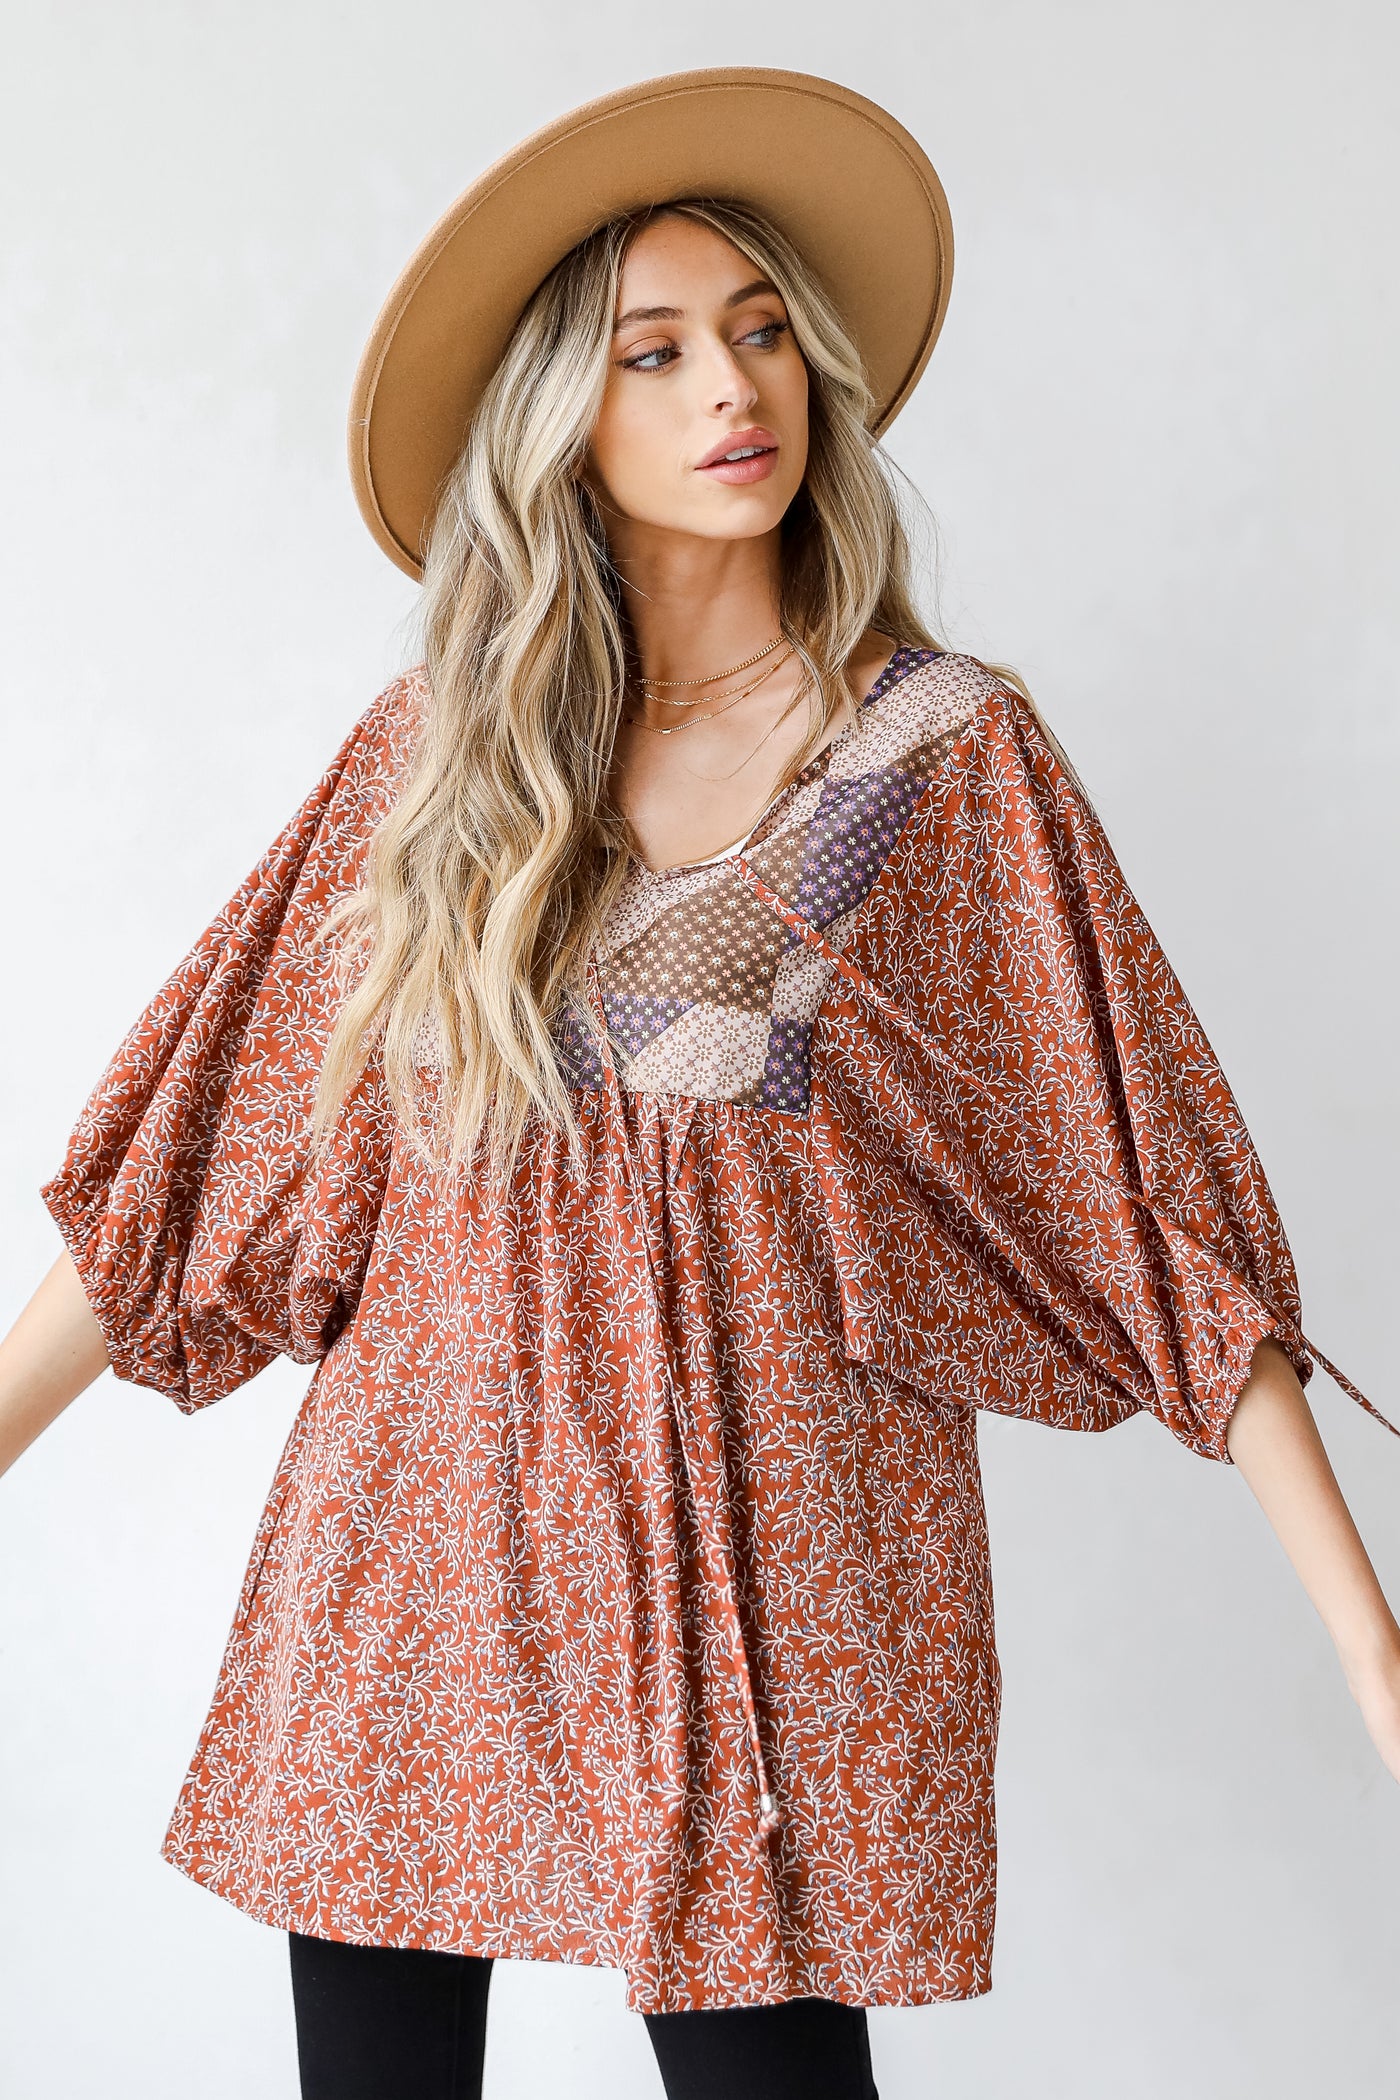 Floral Tunic on model